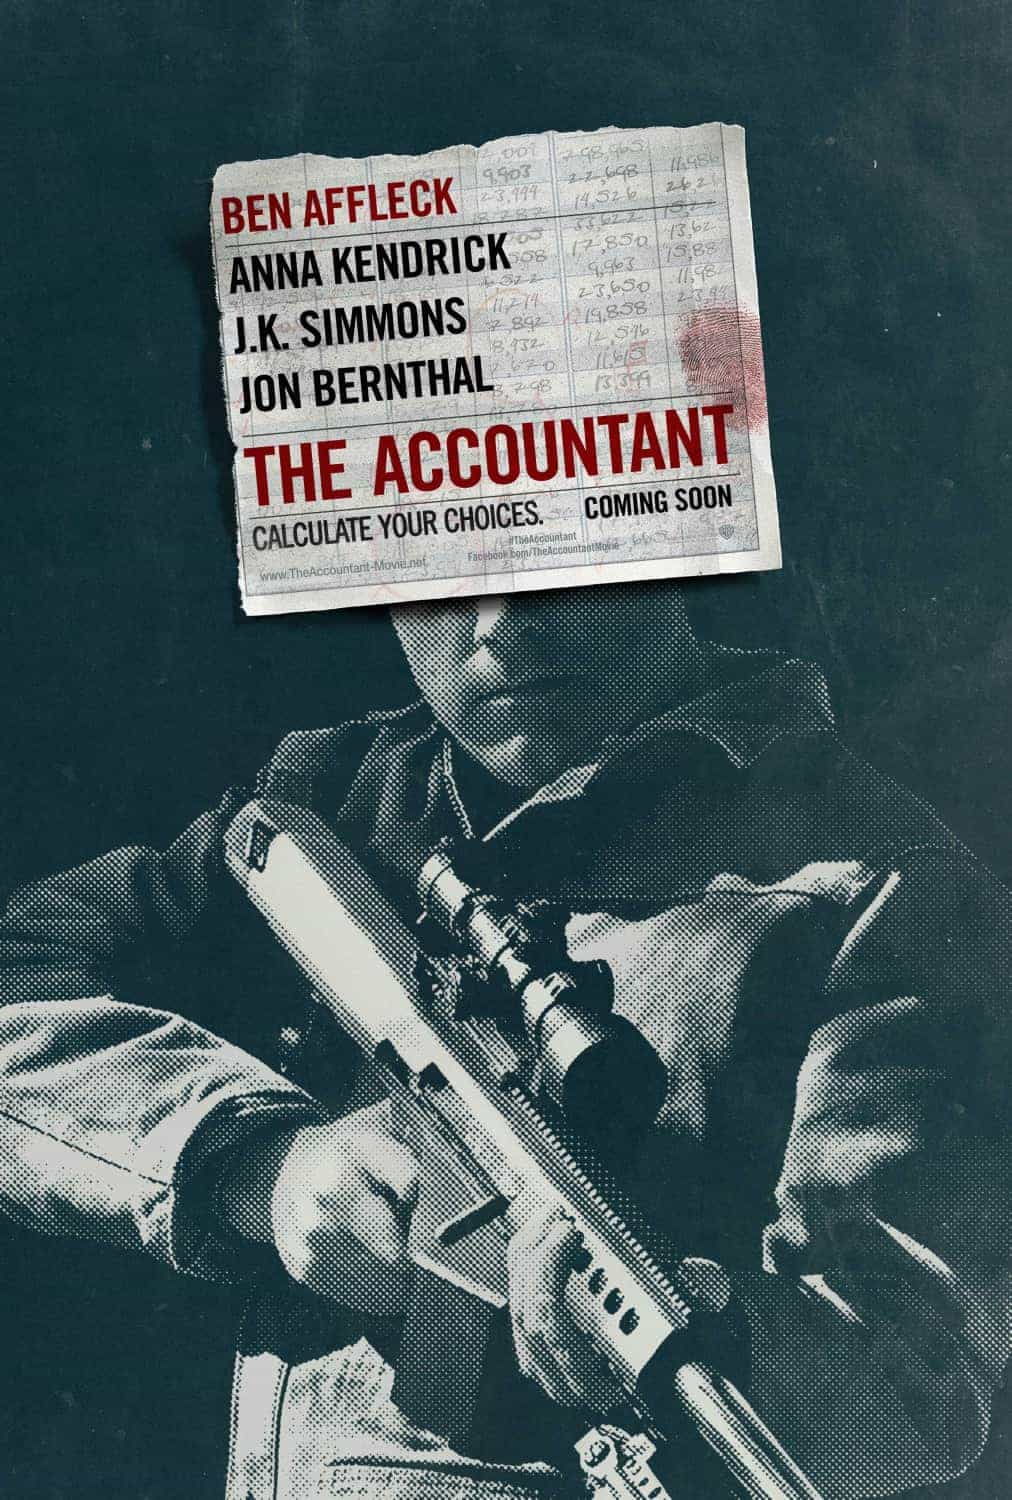 US Box Office Chart Weekend 14 October 2016:  Ben Affleck figures out how to get to number 1 for the second time in 2016 with The Accountant